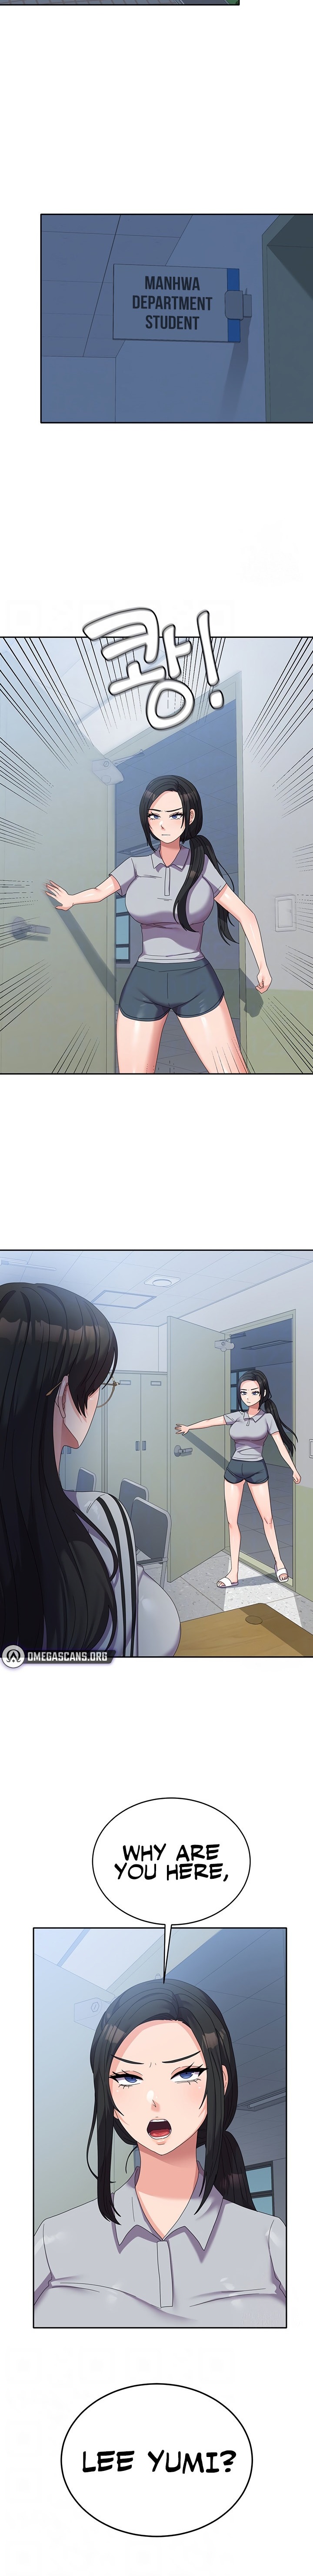 Women’s University Student who Served in the Military - Chapter 37 Page 2